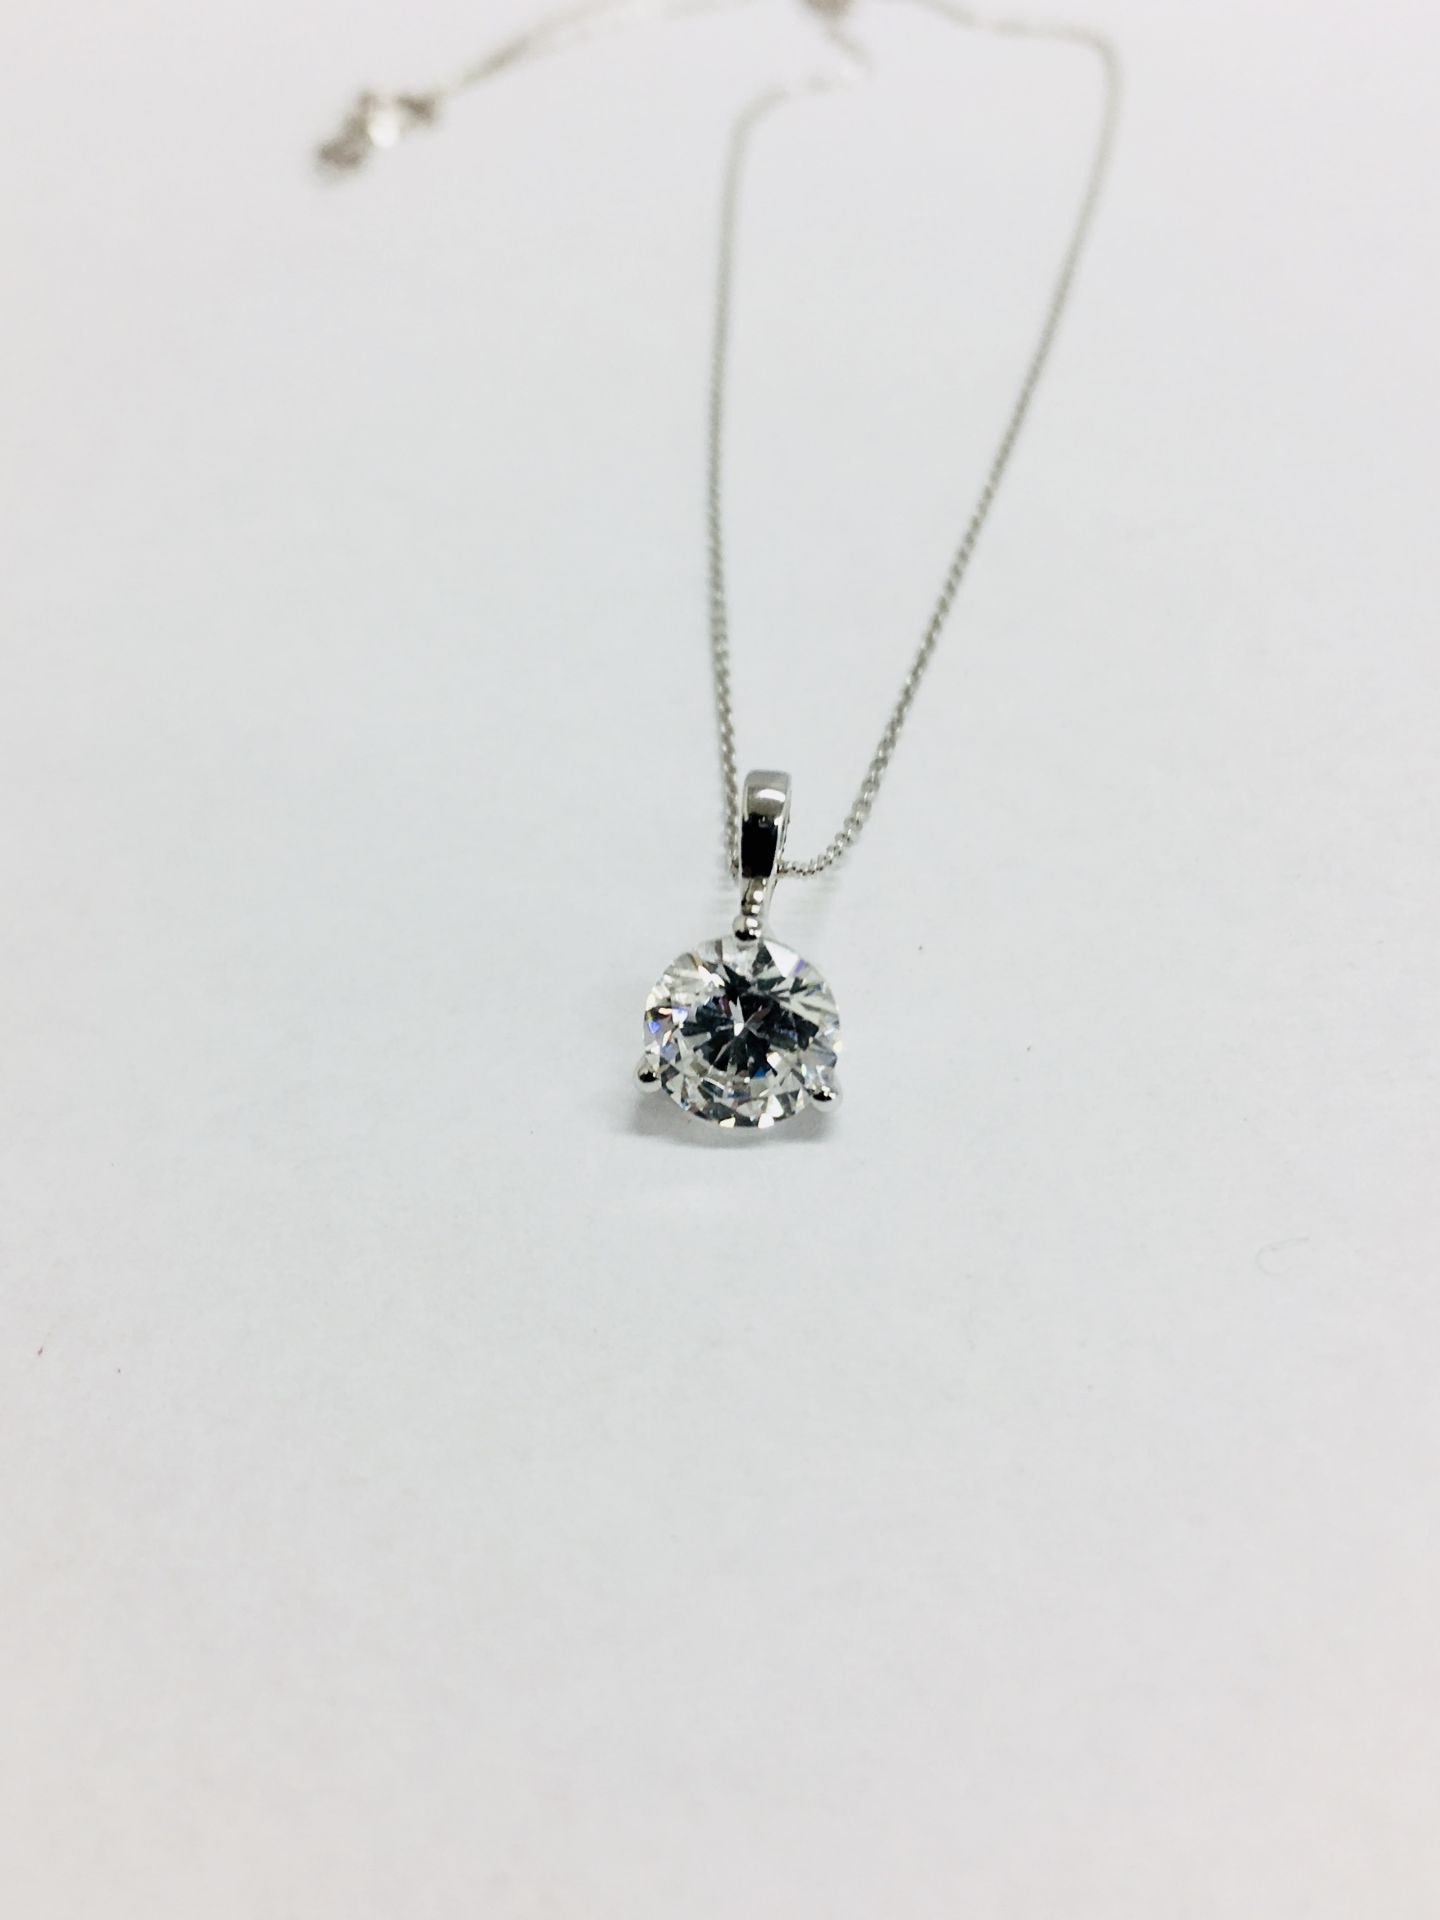 1.00Ct Diamond Solitaire Pendant Set In A Platinum 3 Claw Setting. - Image 11 of 12